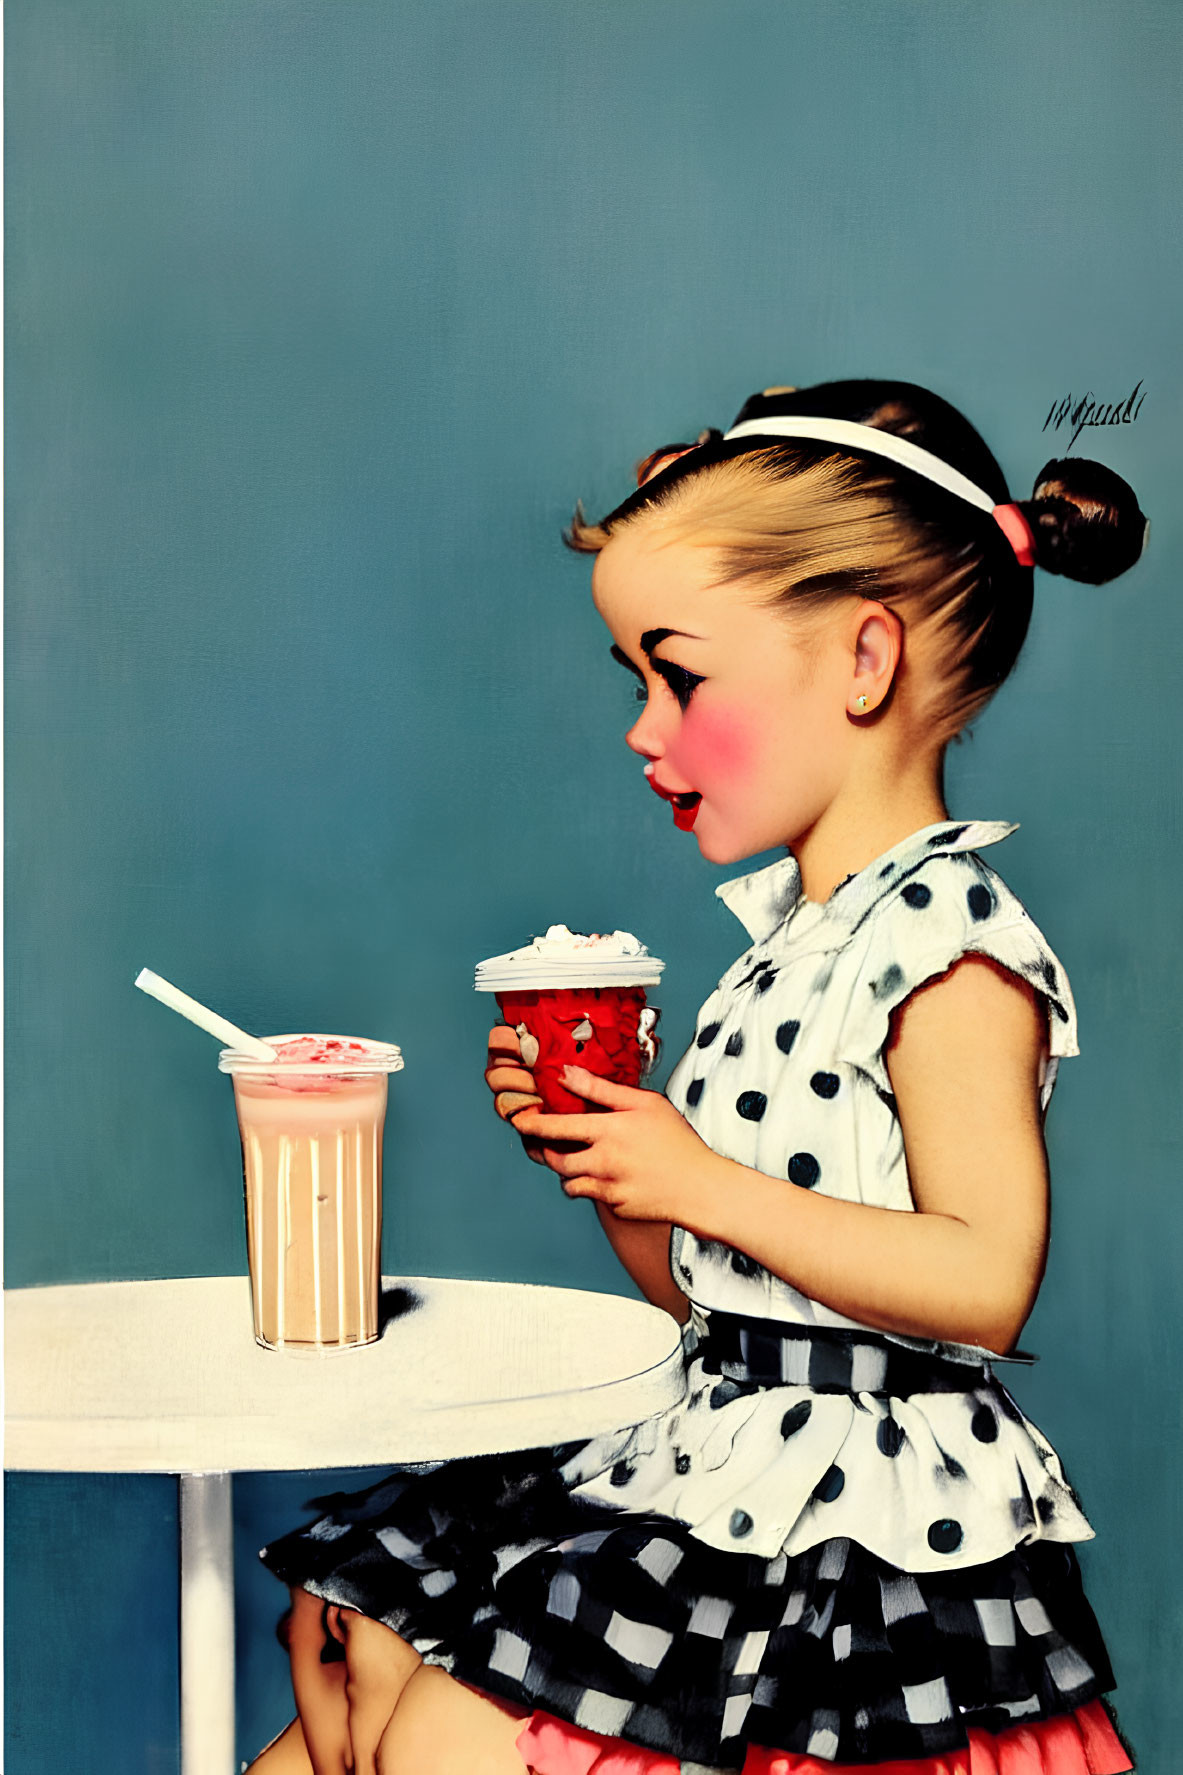 Retro-style illustration of young girl with polka-dot dress and soda cup